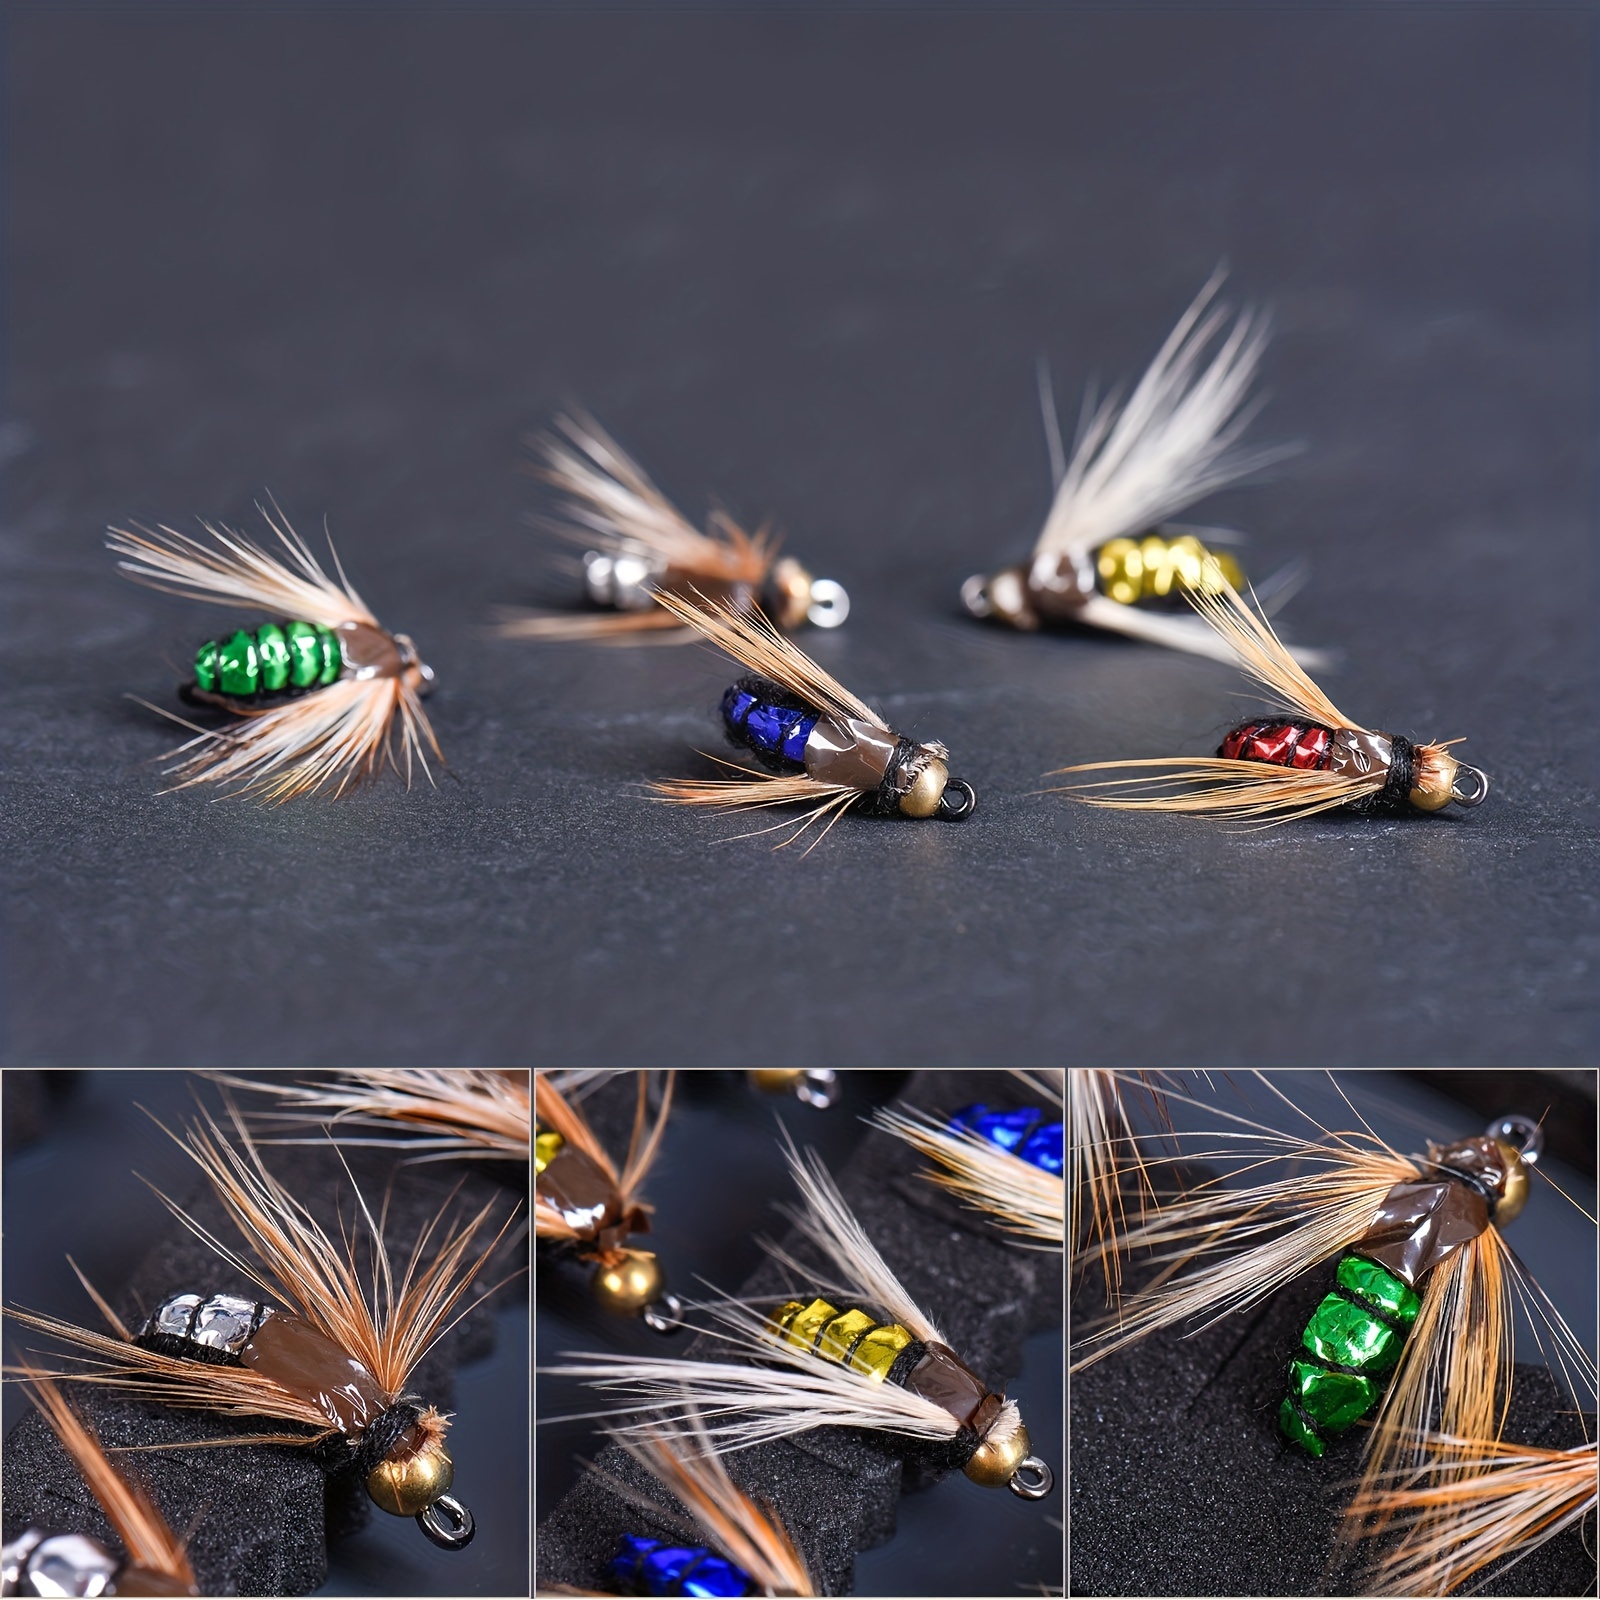 Premium Fly Fishing Flies Kit - 50 Hand-Tied Flies with Waterproof Fly Box  - Perfect for Trout, Bass, and Salmon Fishing